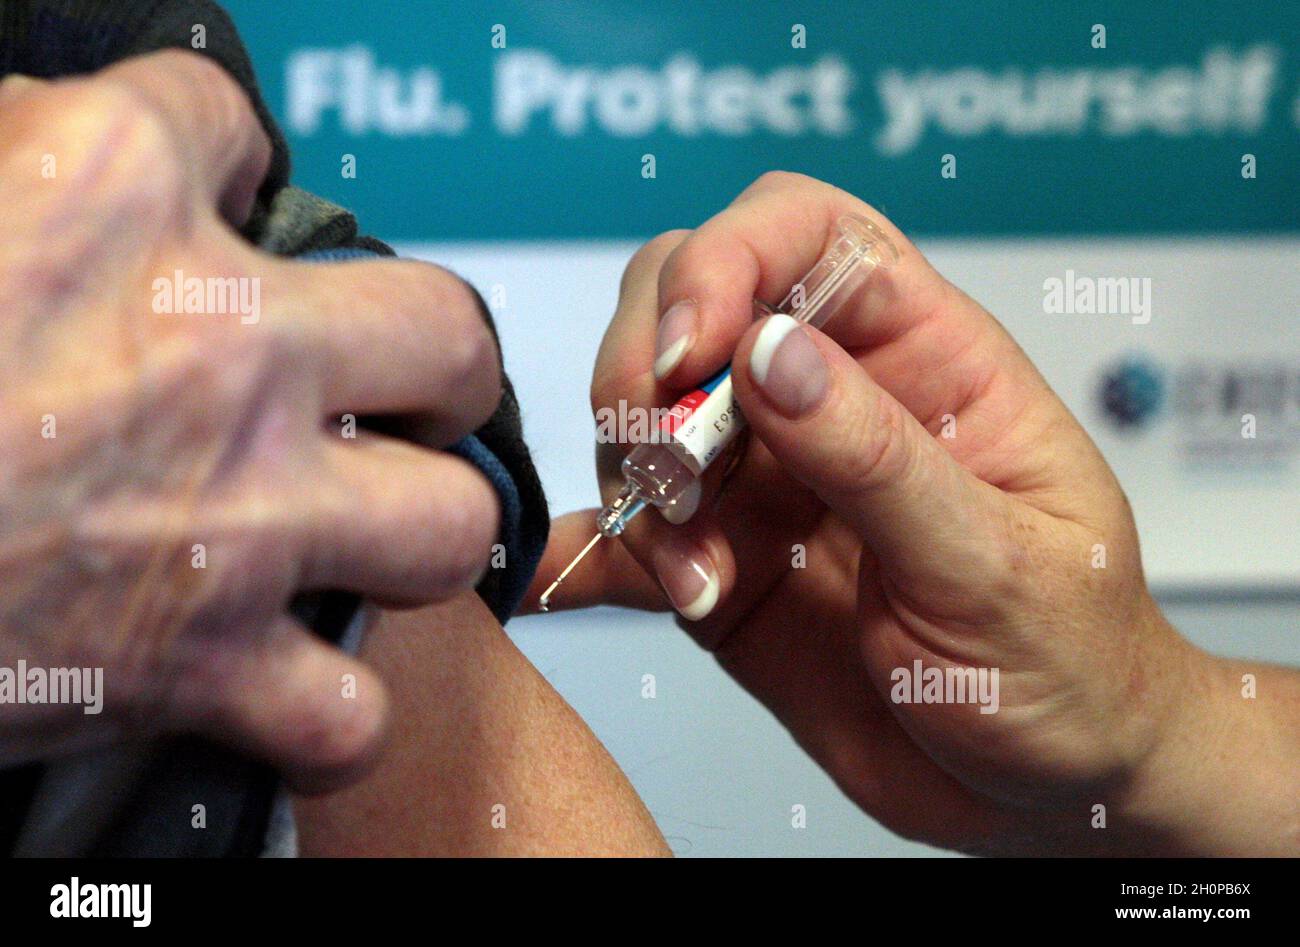 File photo dated 05/10/09 of a person getting a flu jab as the NHS continues to push ahead with its biggest ever flu campaign amid fears that if the viral infection is left unchecked this winter then thousands of lives could be lost. Dr Nikki Kanani, medical director of primary care at NHS England, said: 'This year it is more vital than ever that all children and eligible adults take up the offer of the free vaccine, as we head into one of the most challenging winters yet for the NHS'. Stock Photo